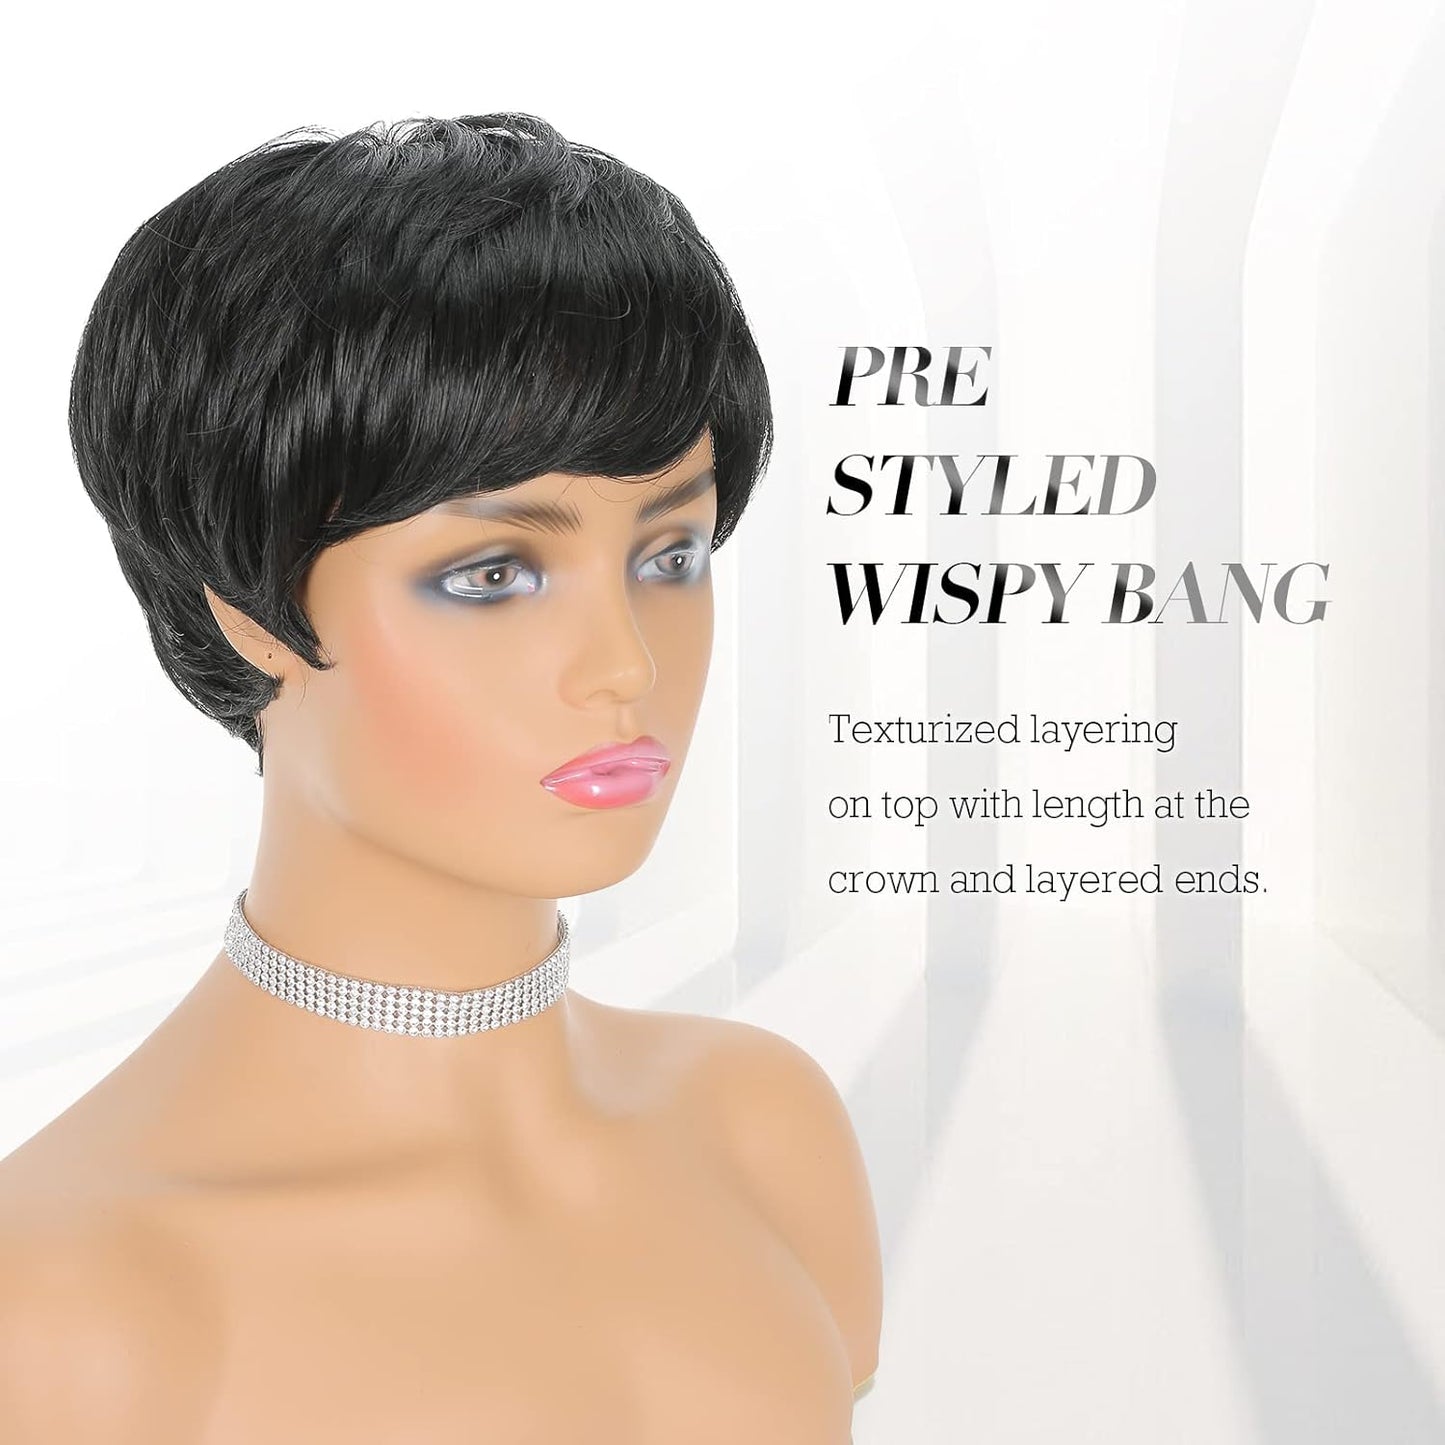 FESHFEN Pixie Cut Wigs Synthetic Short Ombre Gray Pixie Haircut Wig with Bangs Glueless Layered Wig Wavy Grey to Black Wigs for Women